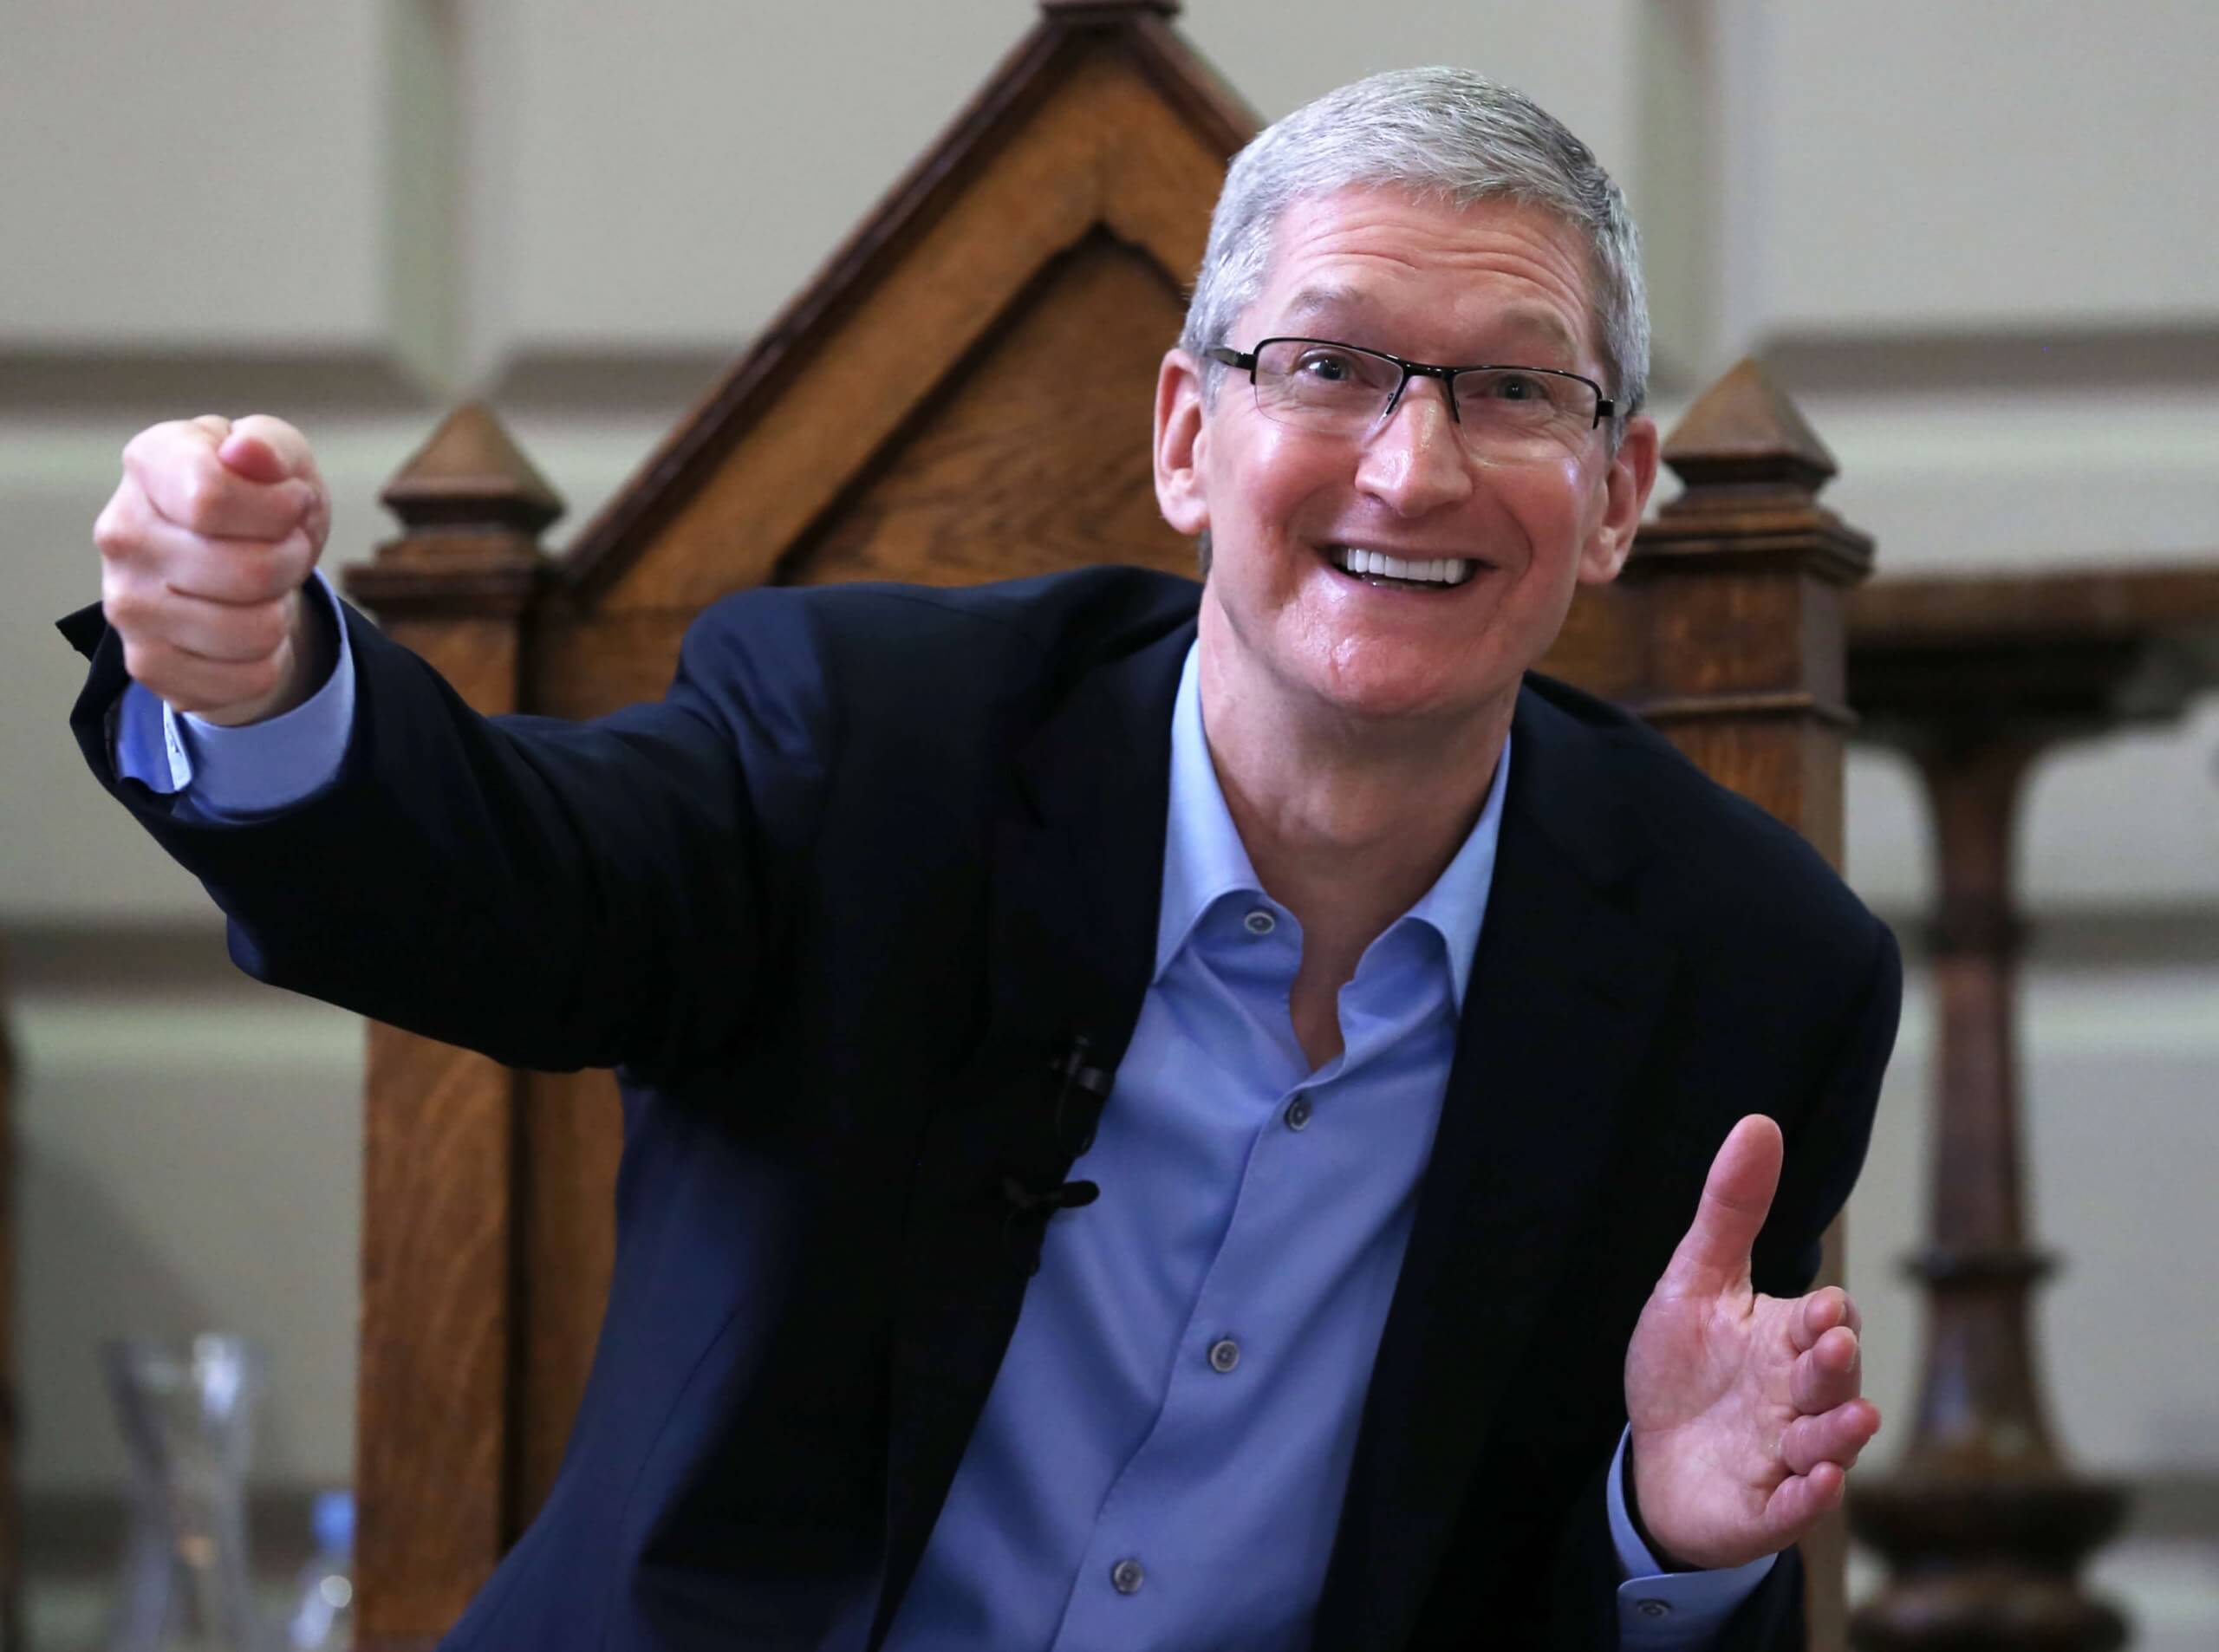 Court grants Apple a temporary restraining order against man who was stalking Tim Cook